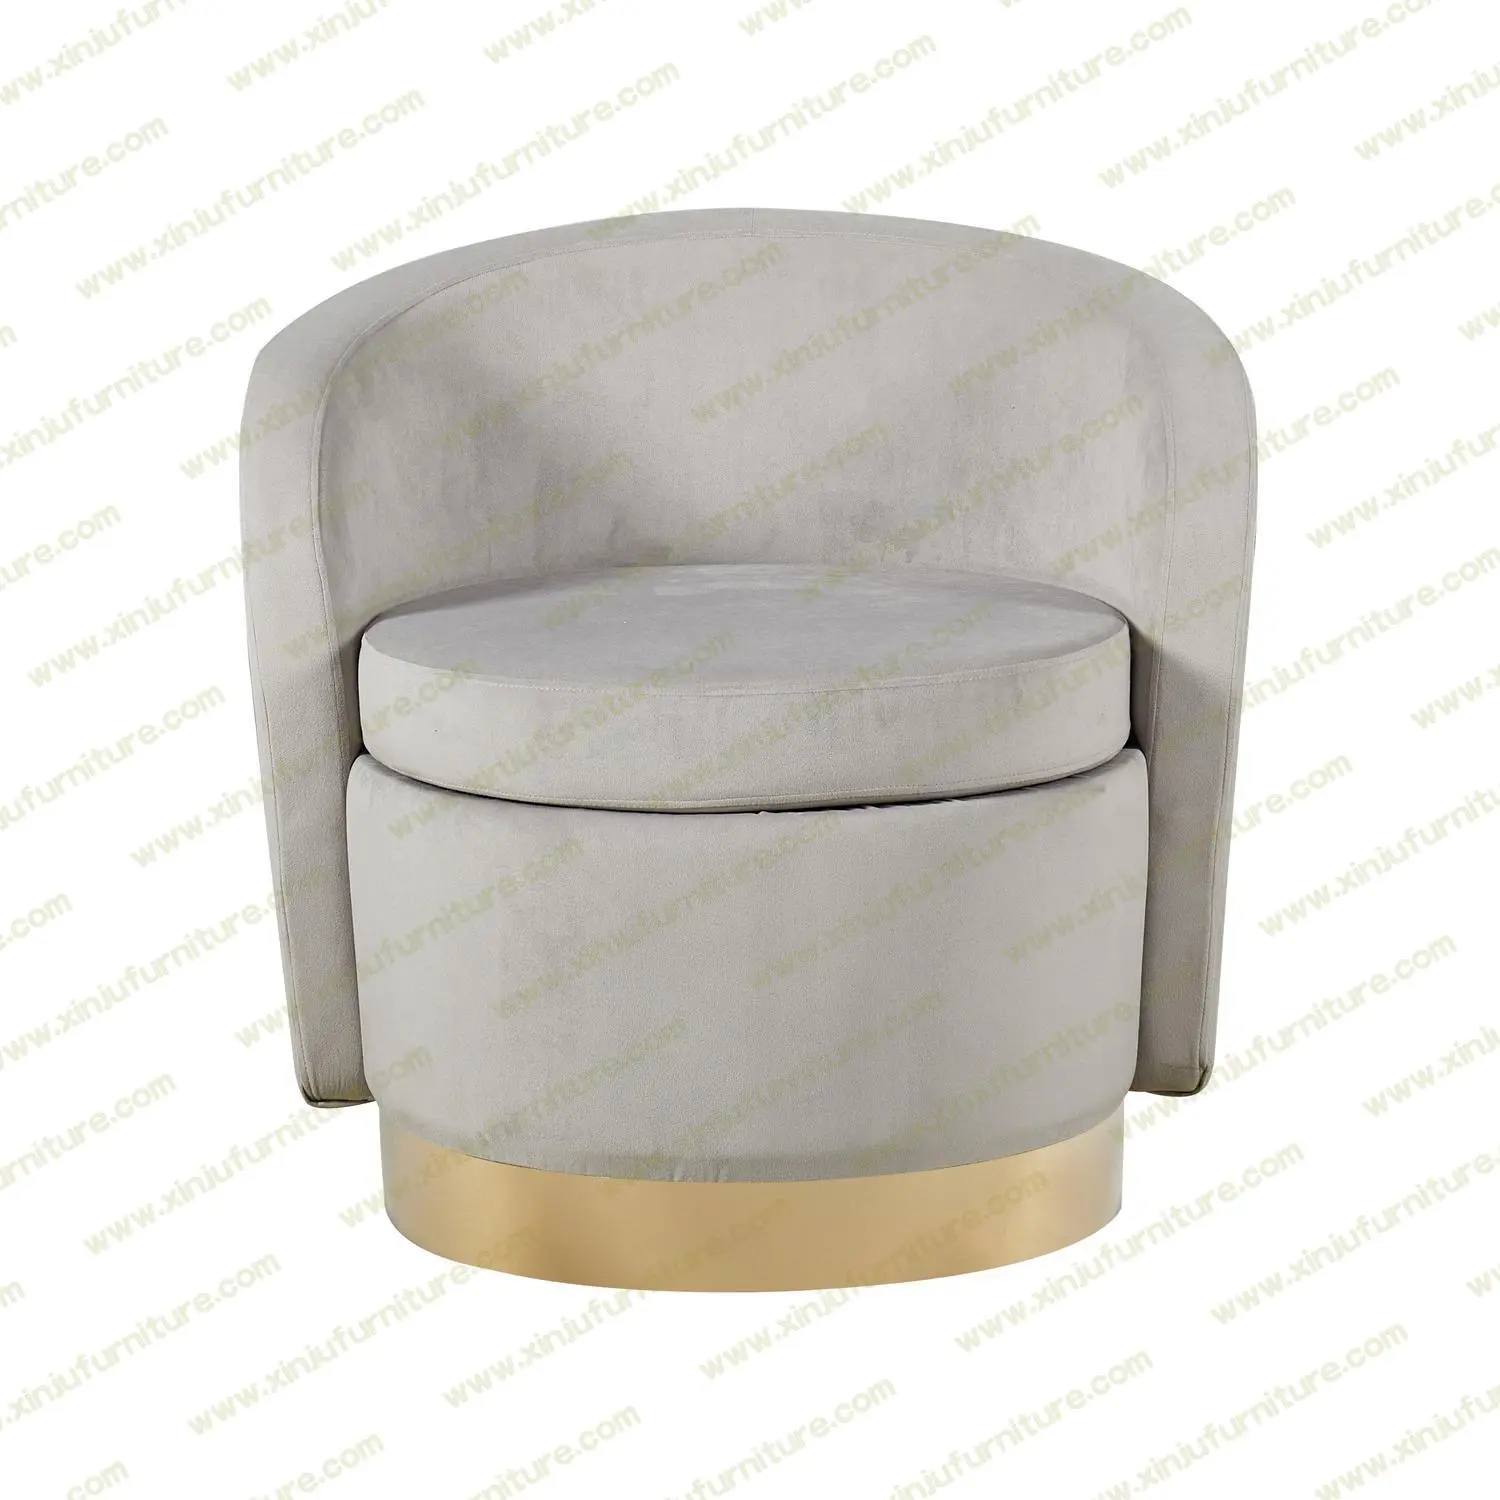 Durable and beautiful Ottoman chair gray